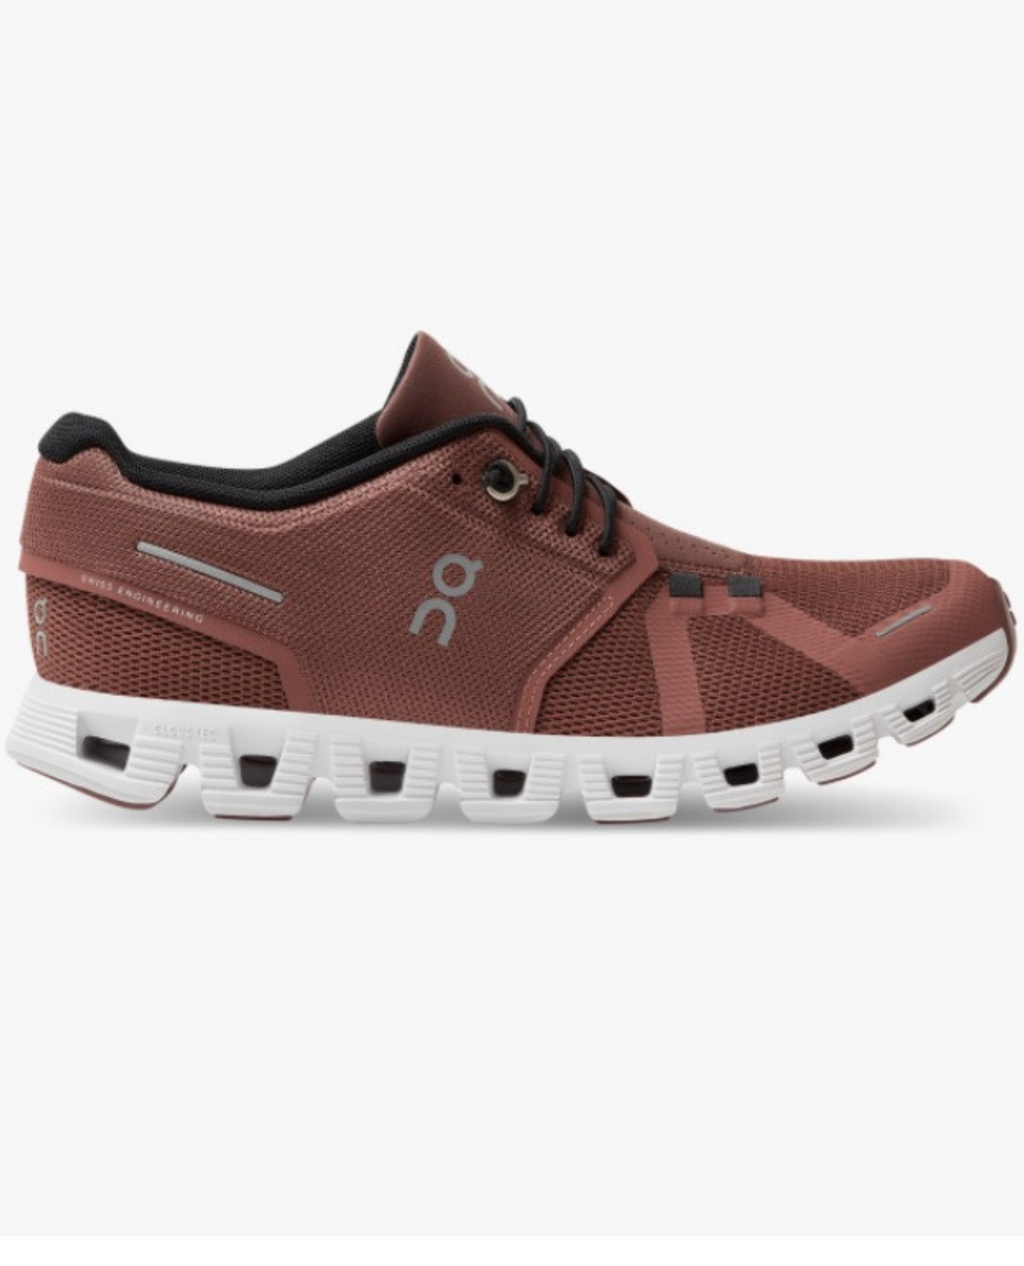 Cloud 5 Sneaker - Island Outfitters